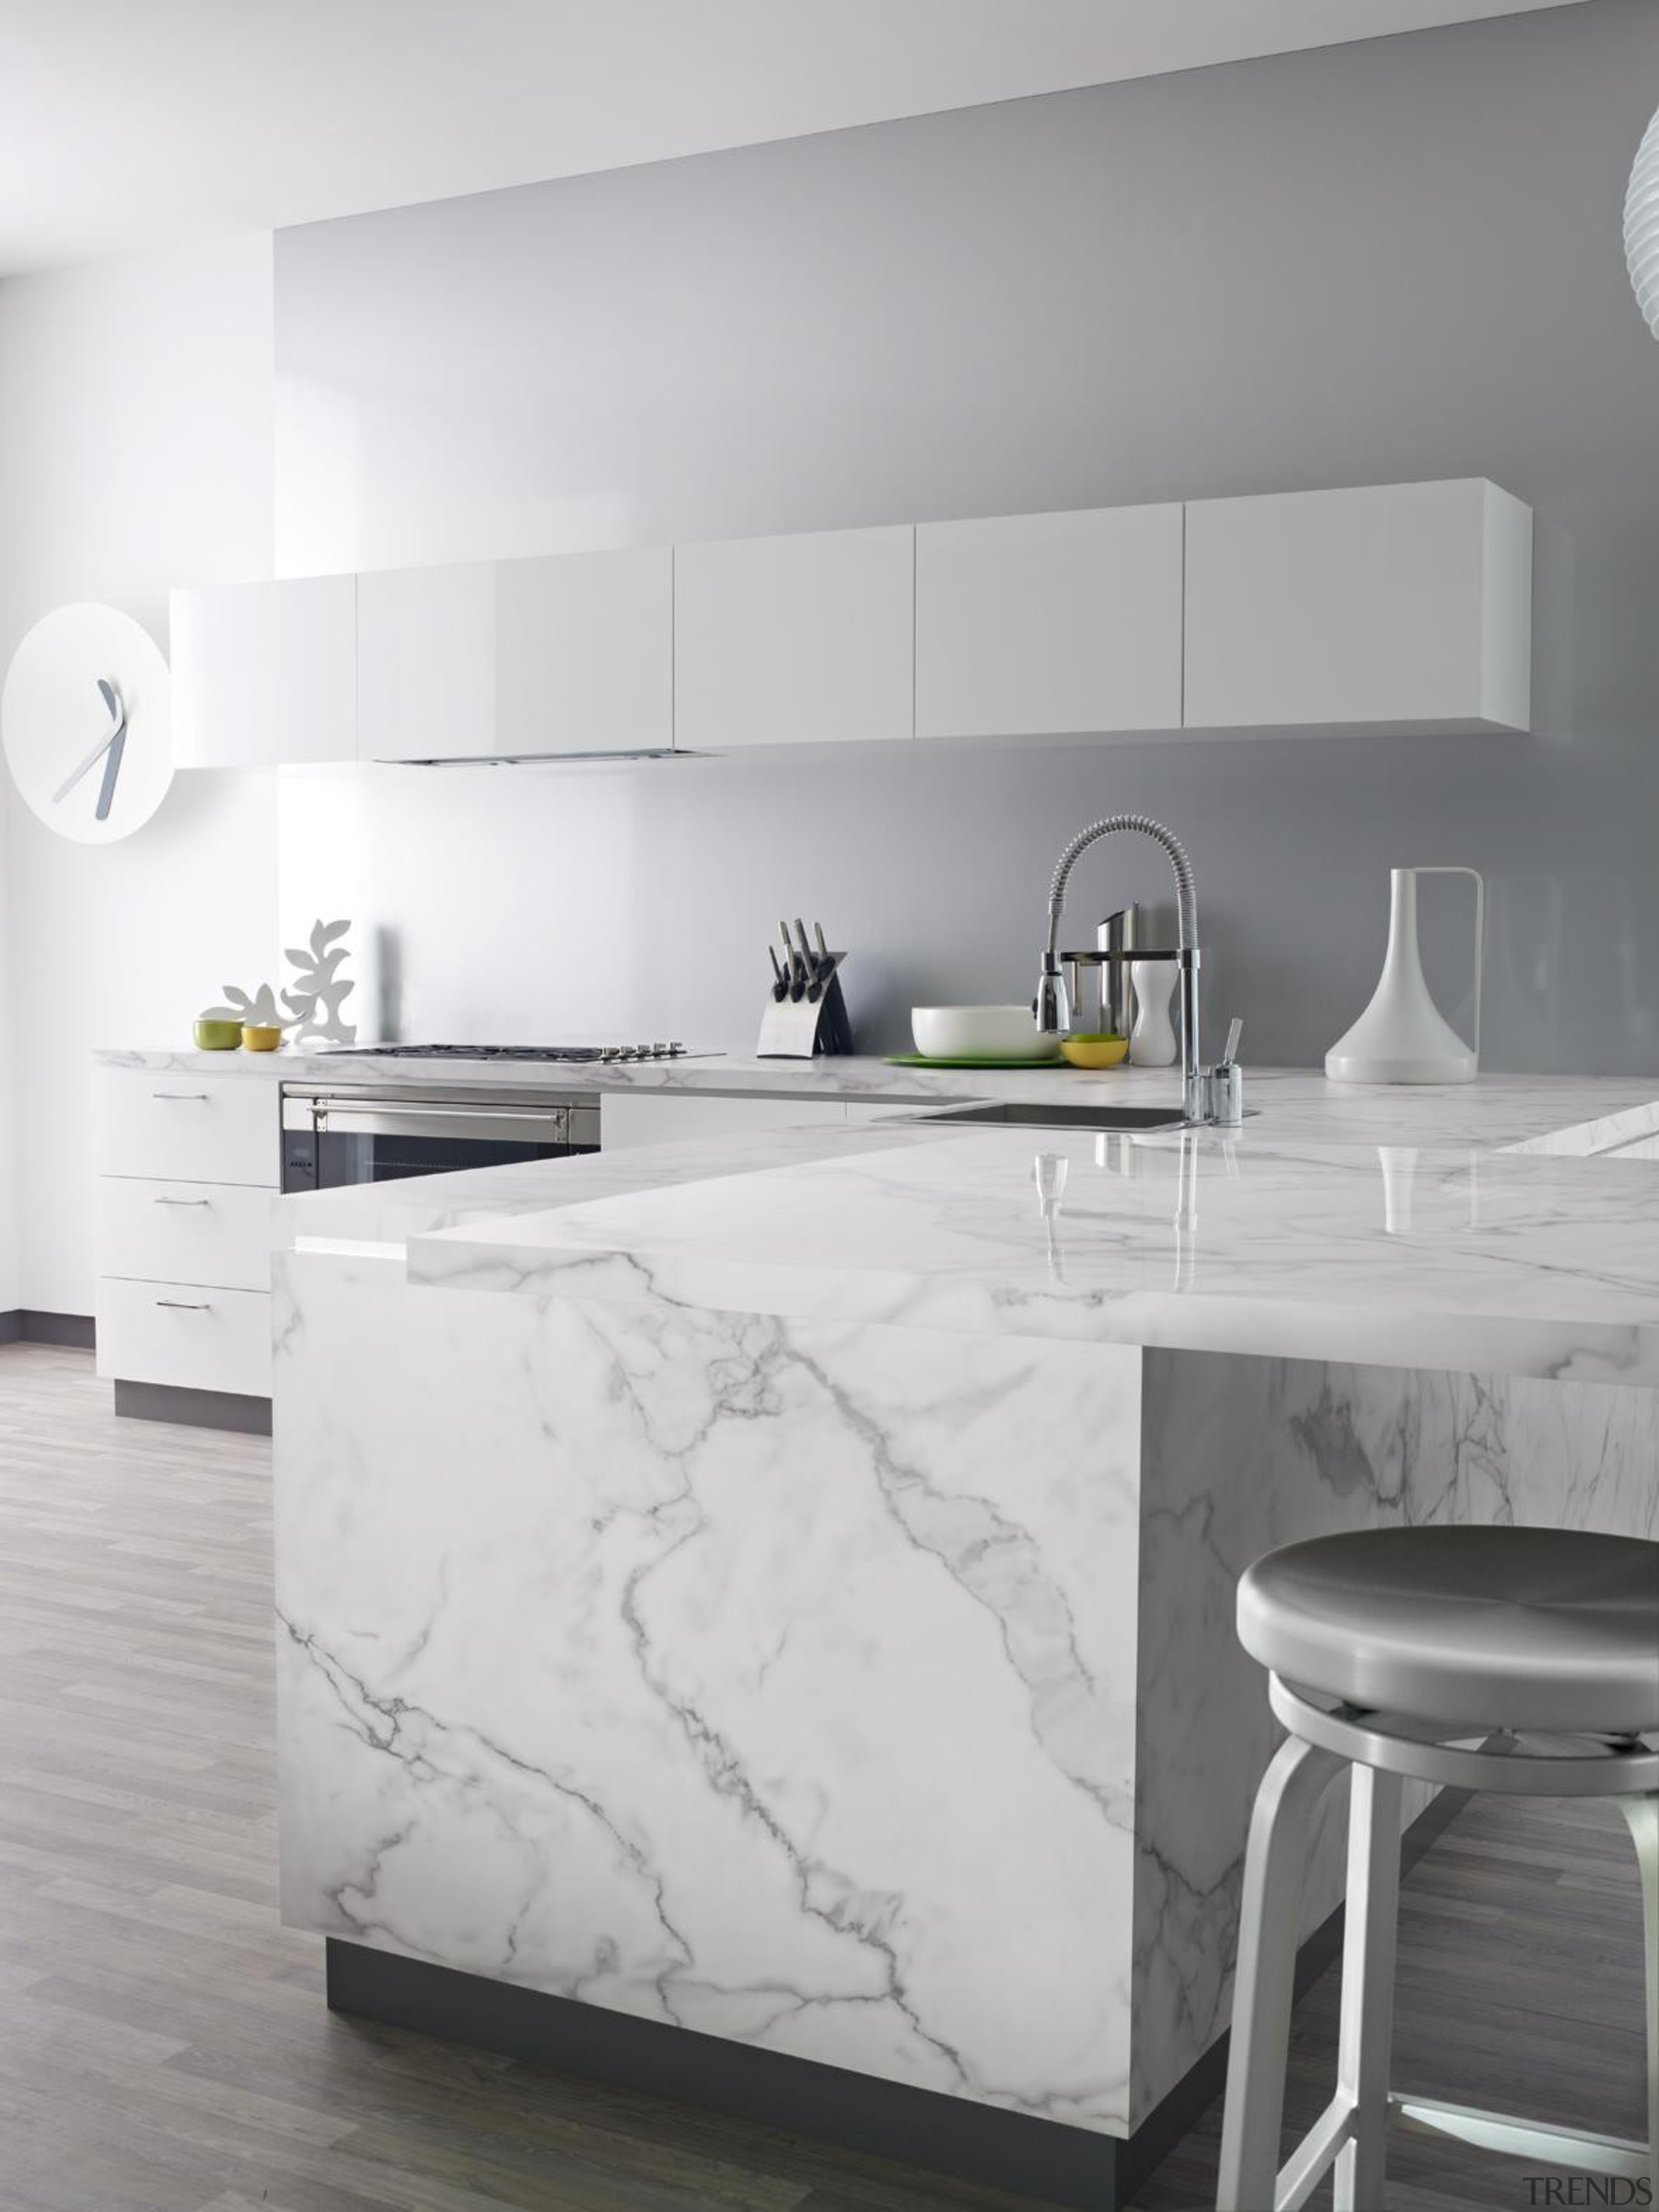 180fx carerra marble 1.jpg - 180fx_carerra_marble_1.jpg - countertop countertop, floor, furniture, home appliance, interior design, kitchen, product design, table, tap, tile, wall, gray, white